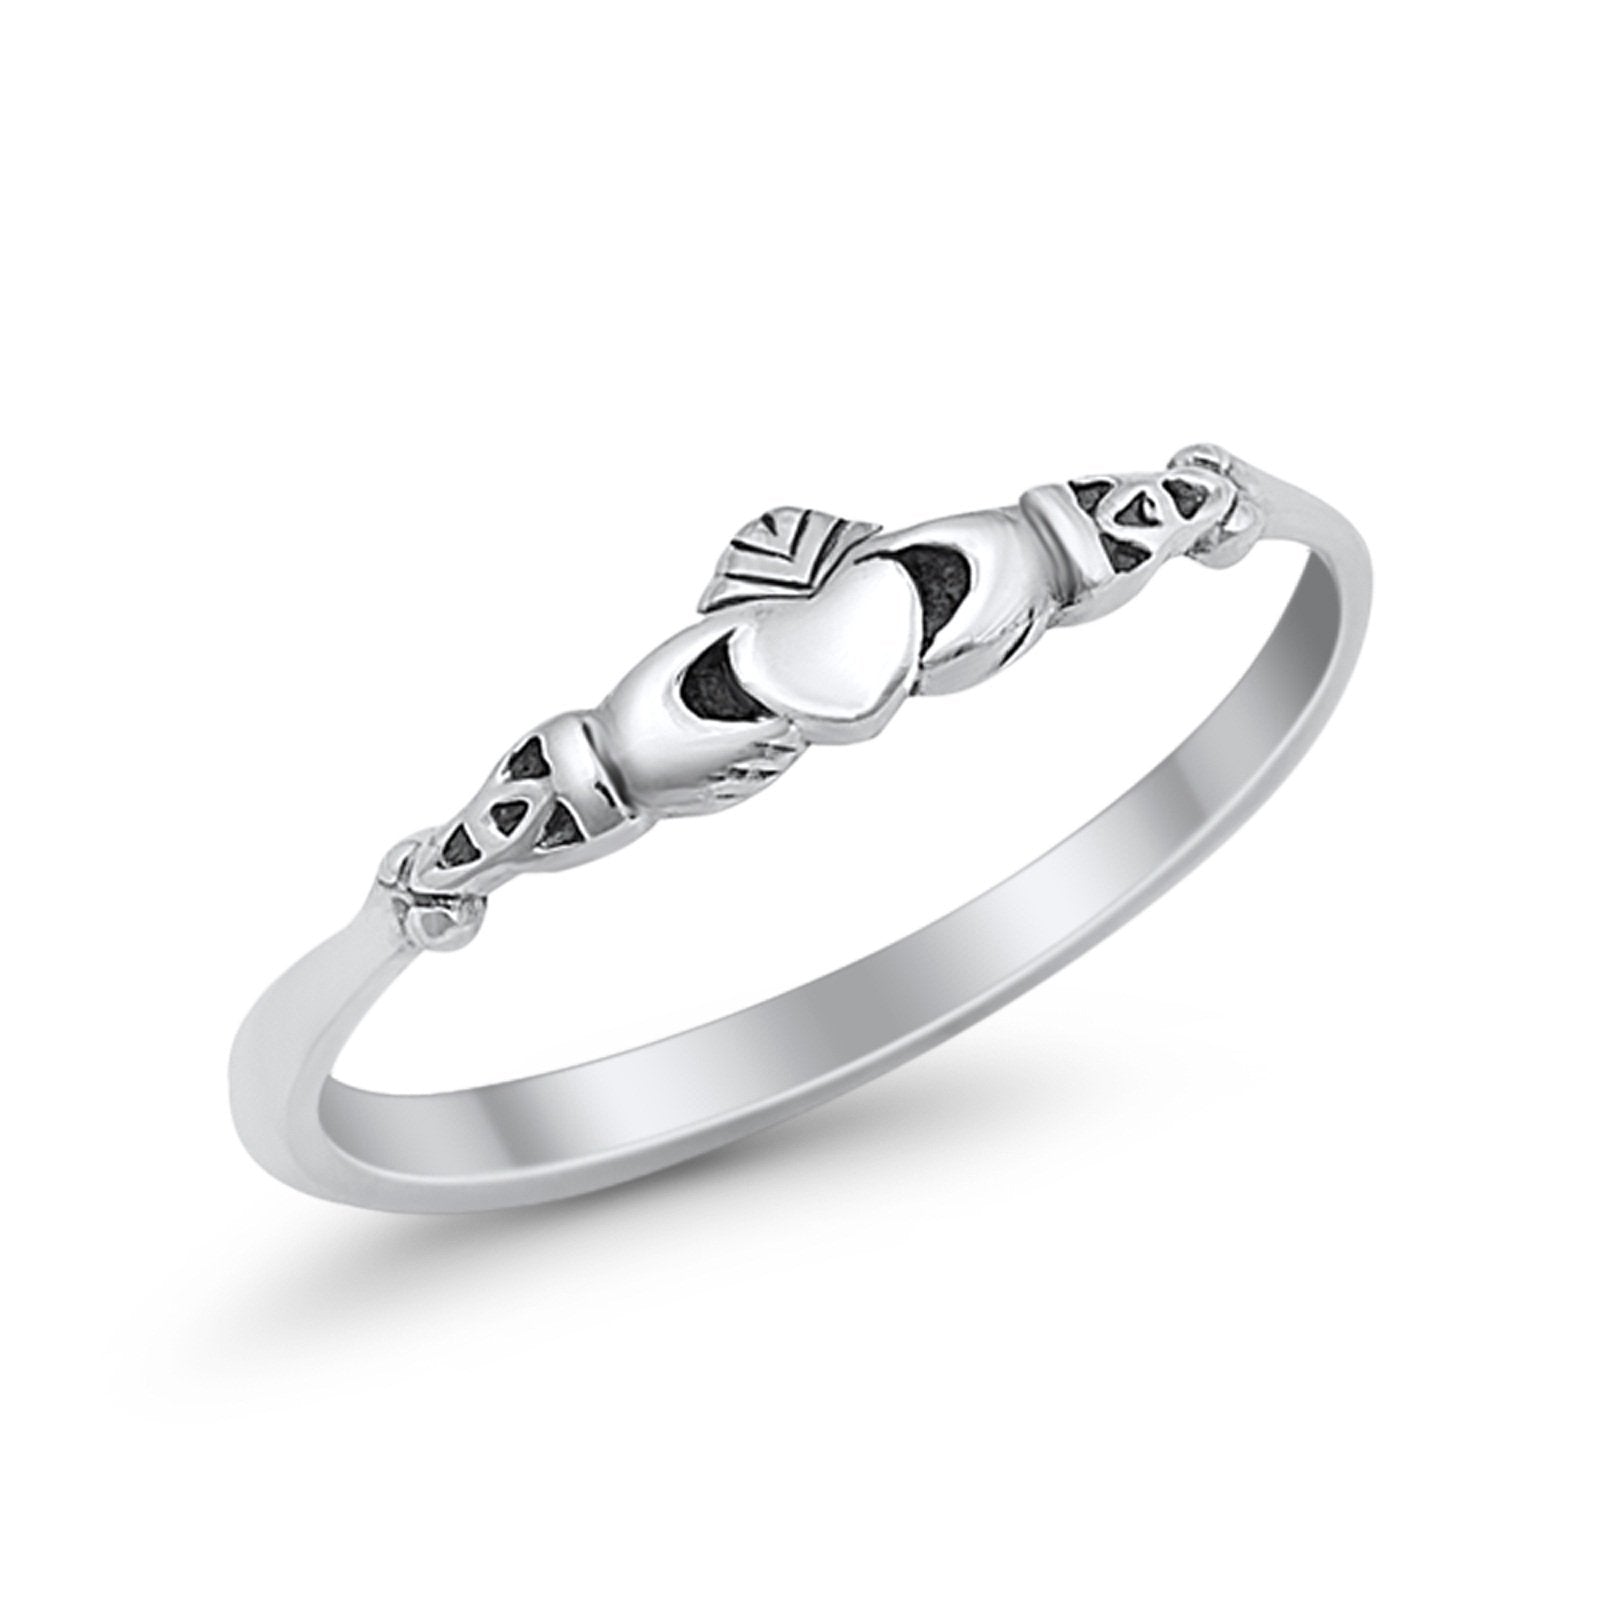 Petite Dainty Plain Simple Heart Claddagh Promise Ring 925 Sterling Silver